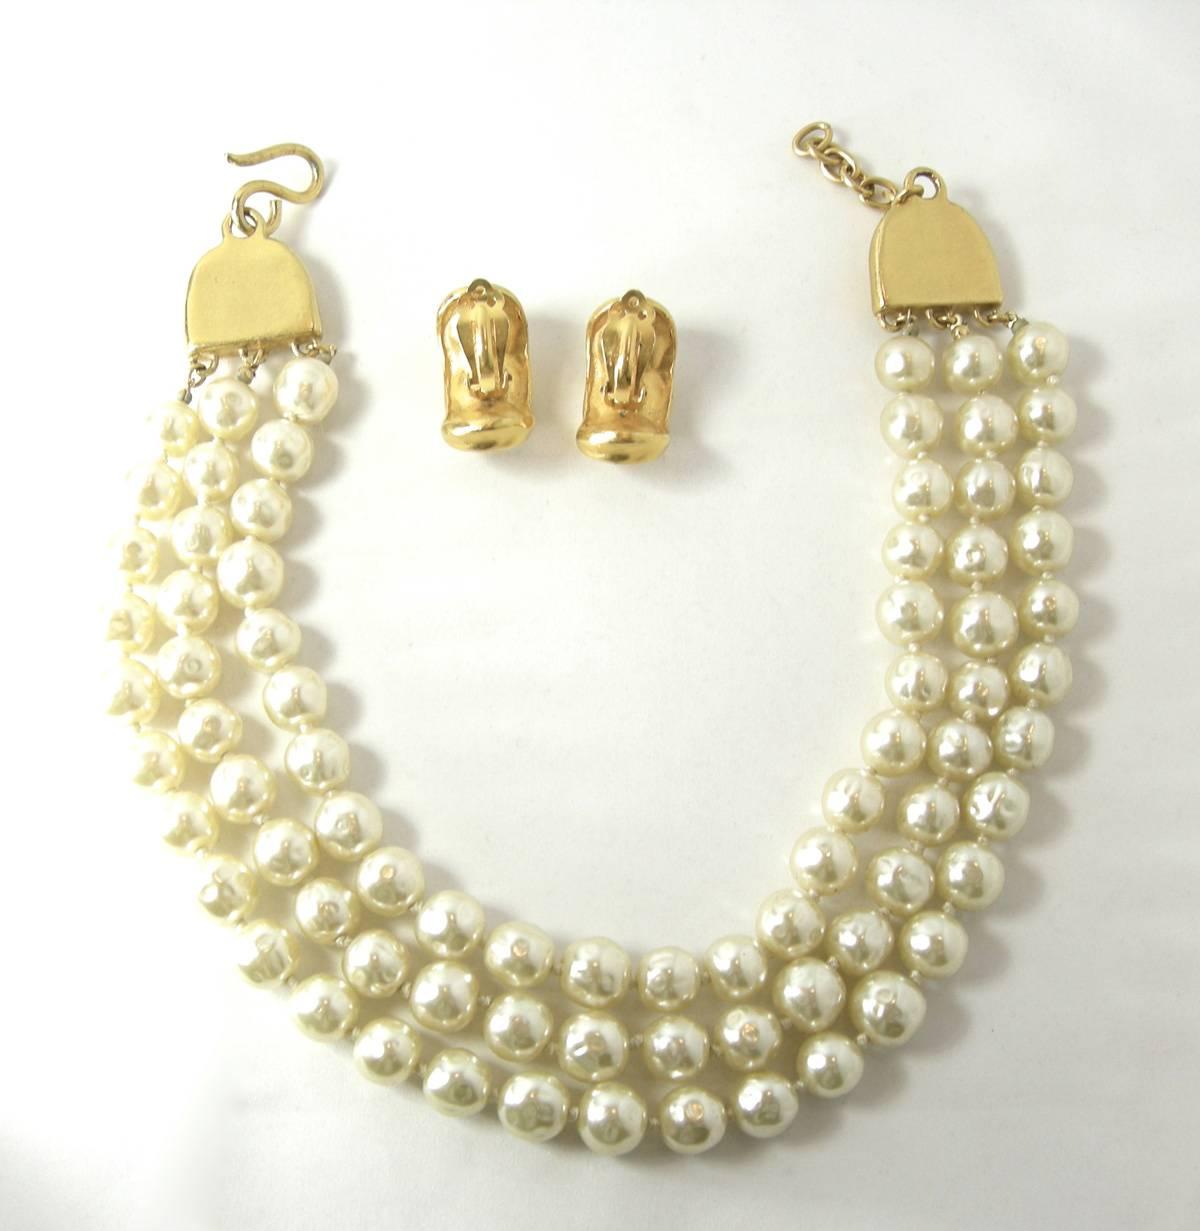 Pearls are back and what better way to celebrate them is with this Robert Lee Morris faux baroque pearl necklace and earrings set.  I bought it from a collector of Robert Lee Morris     There are 3 strands of large pearls.  Each end has a gold tone